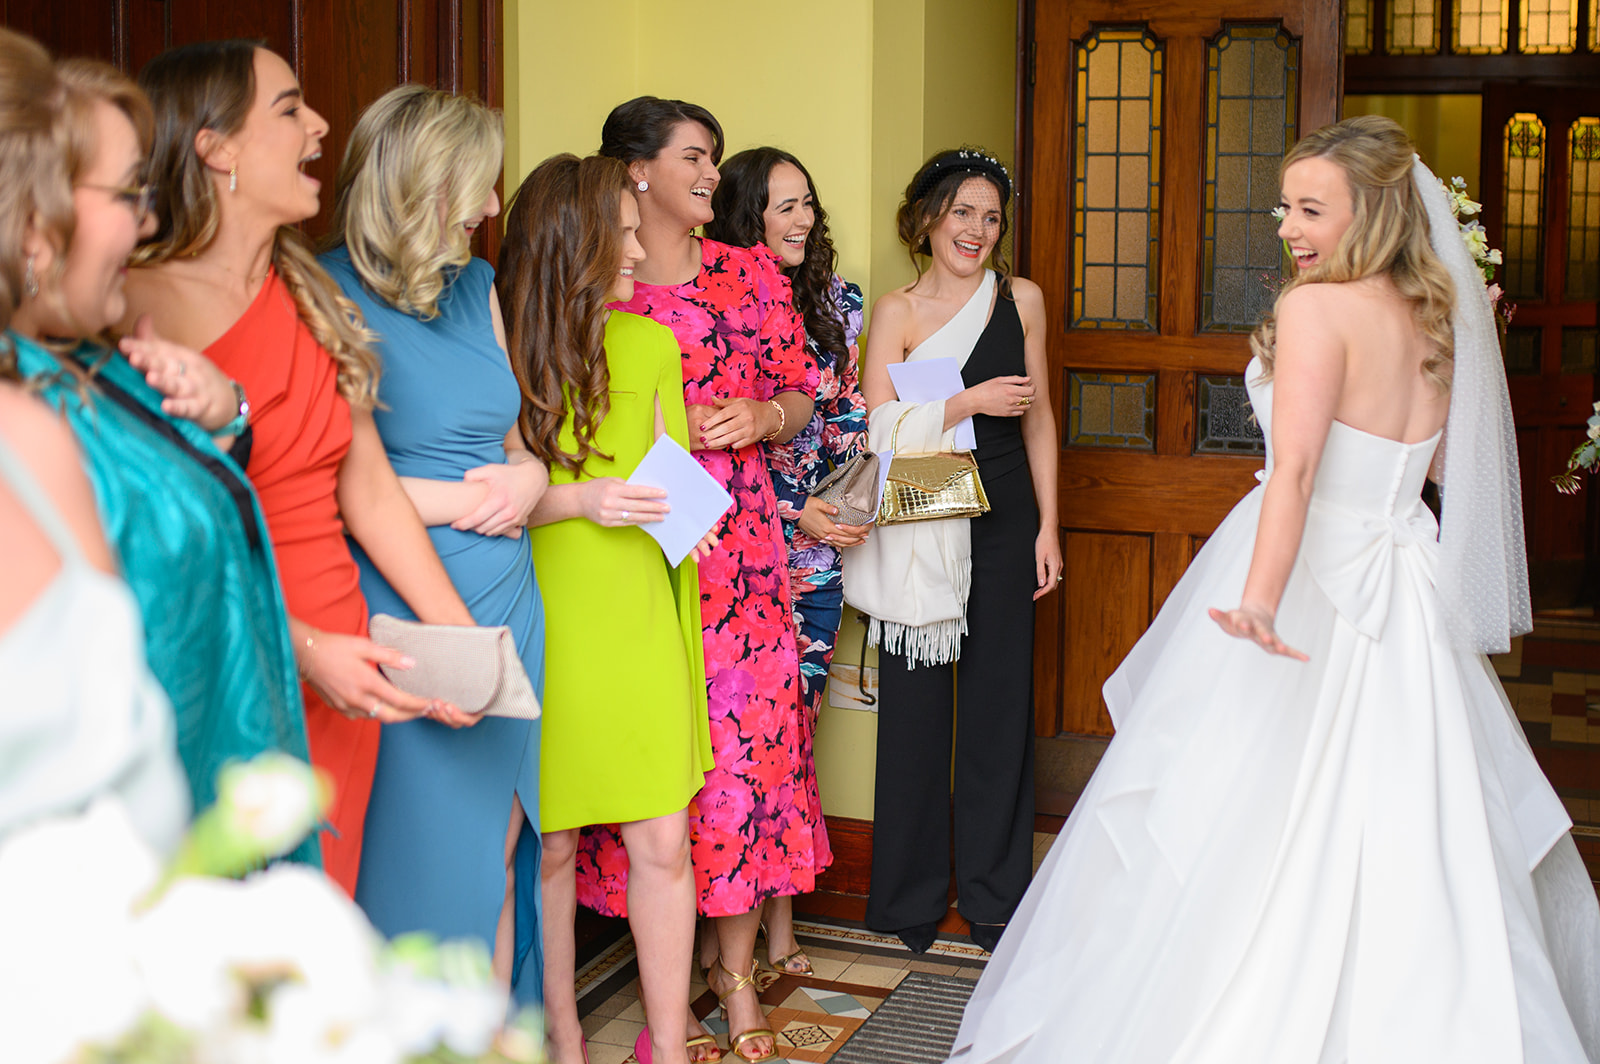 Friends meet Bride outside the church before walking up the isle